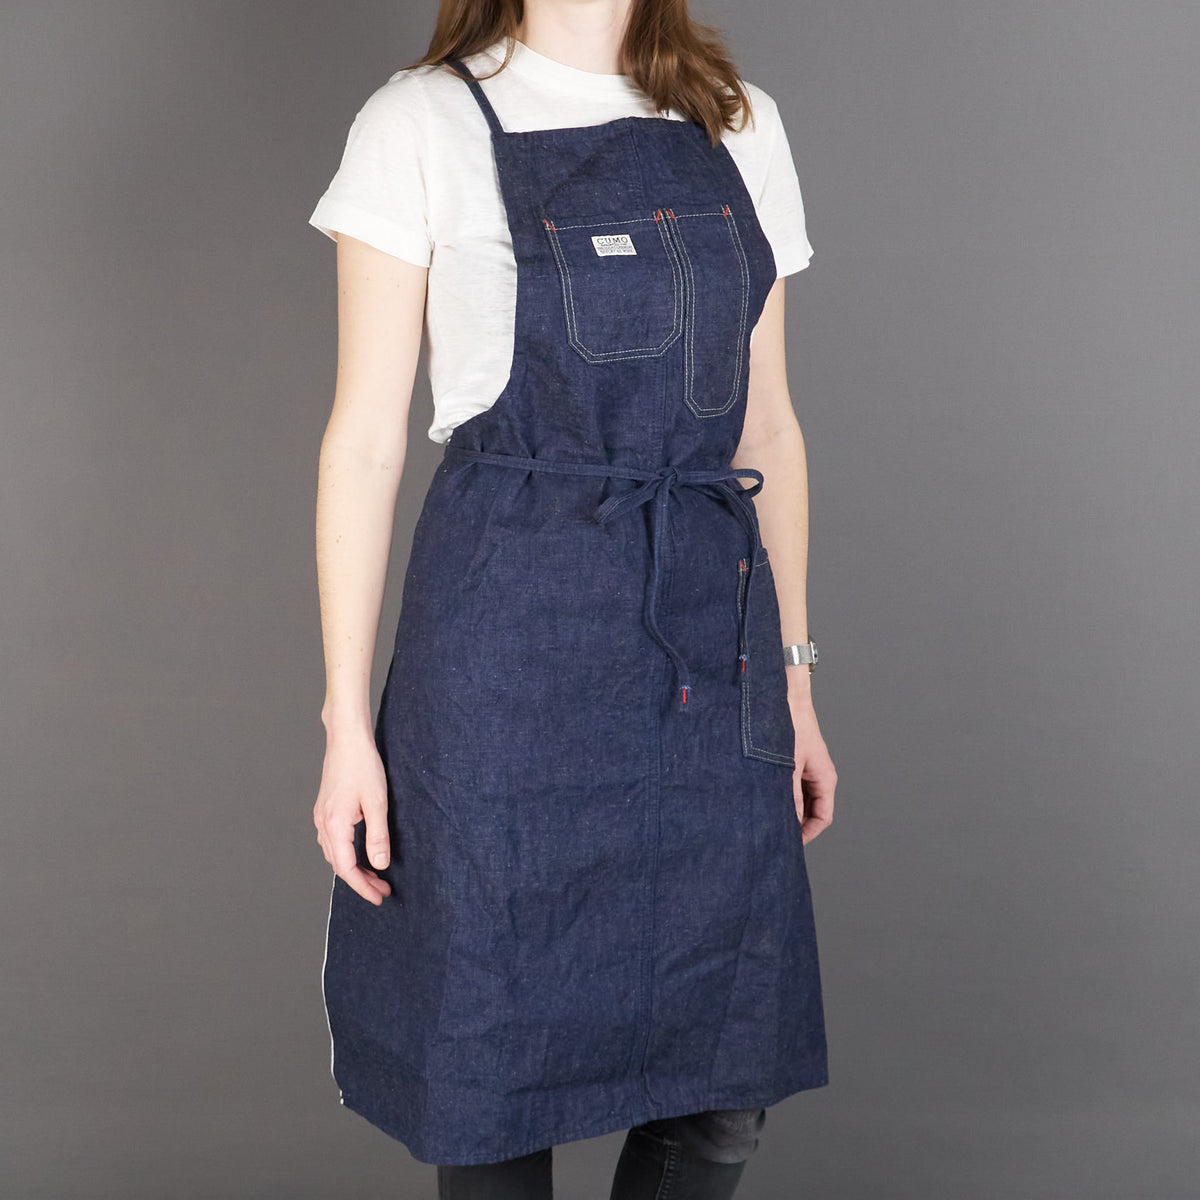 Cumo Play and Work Apron